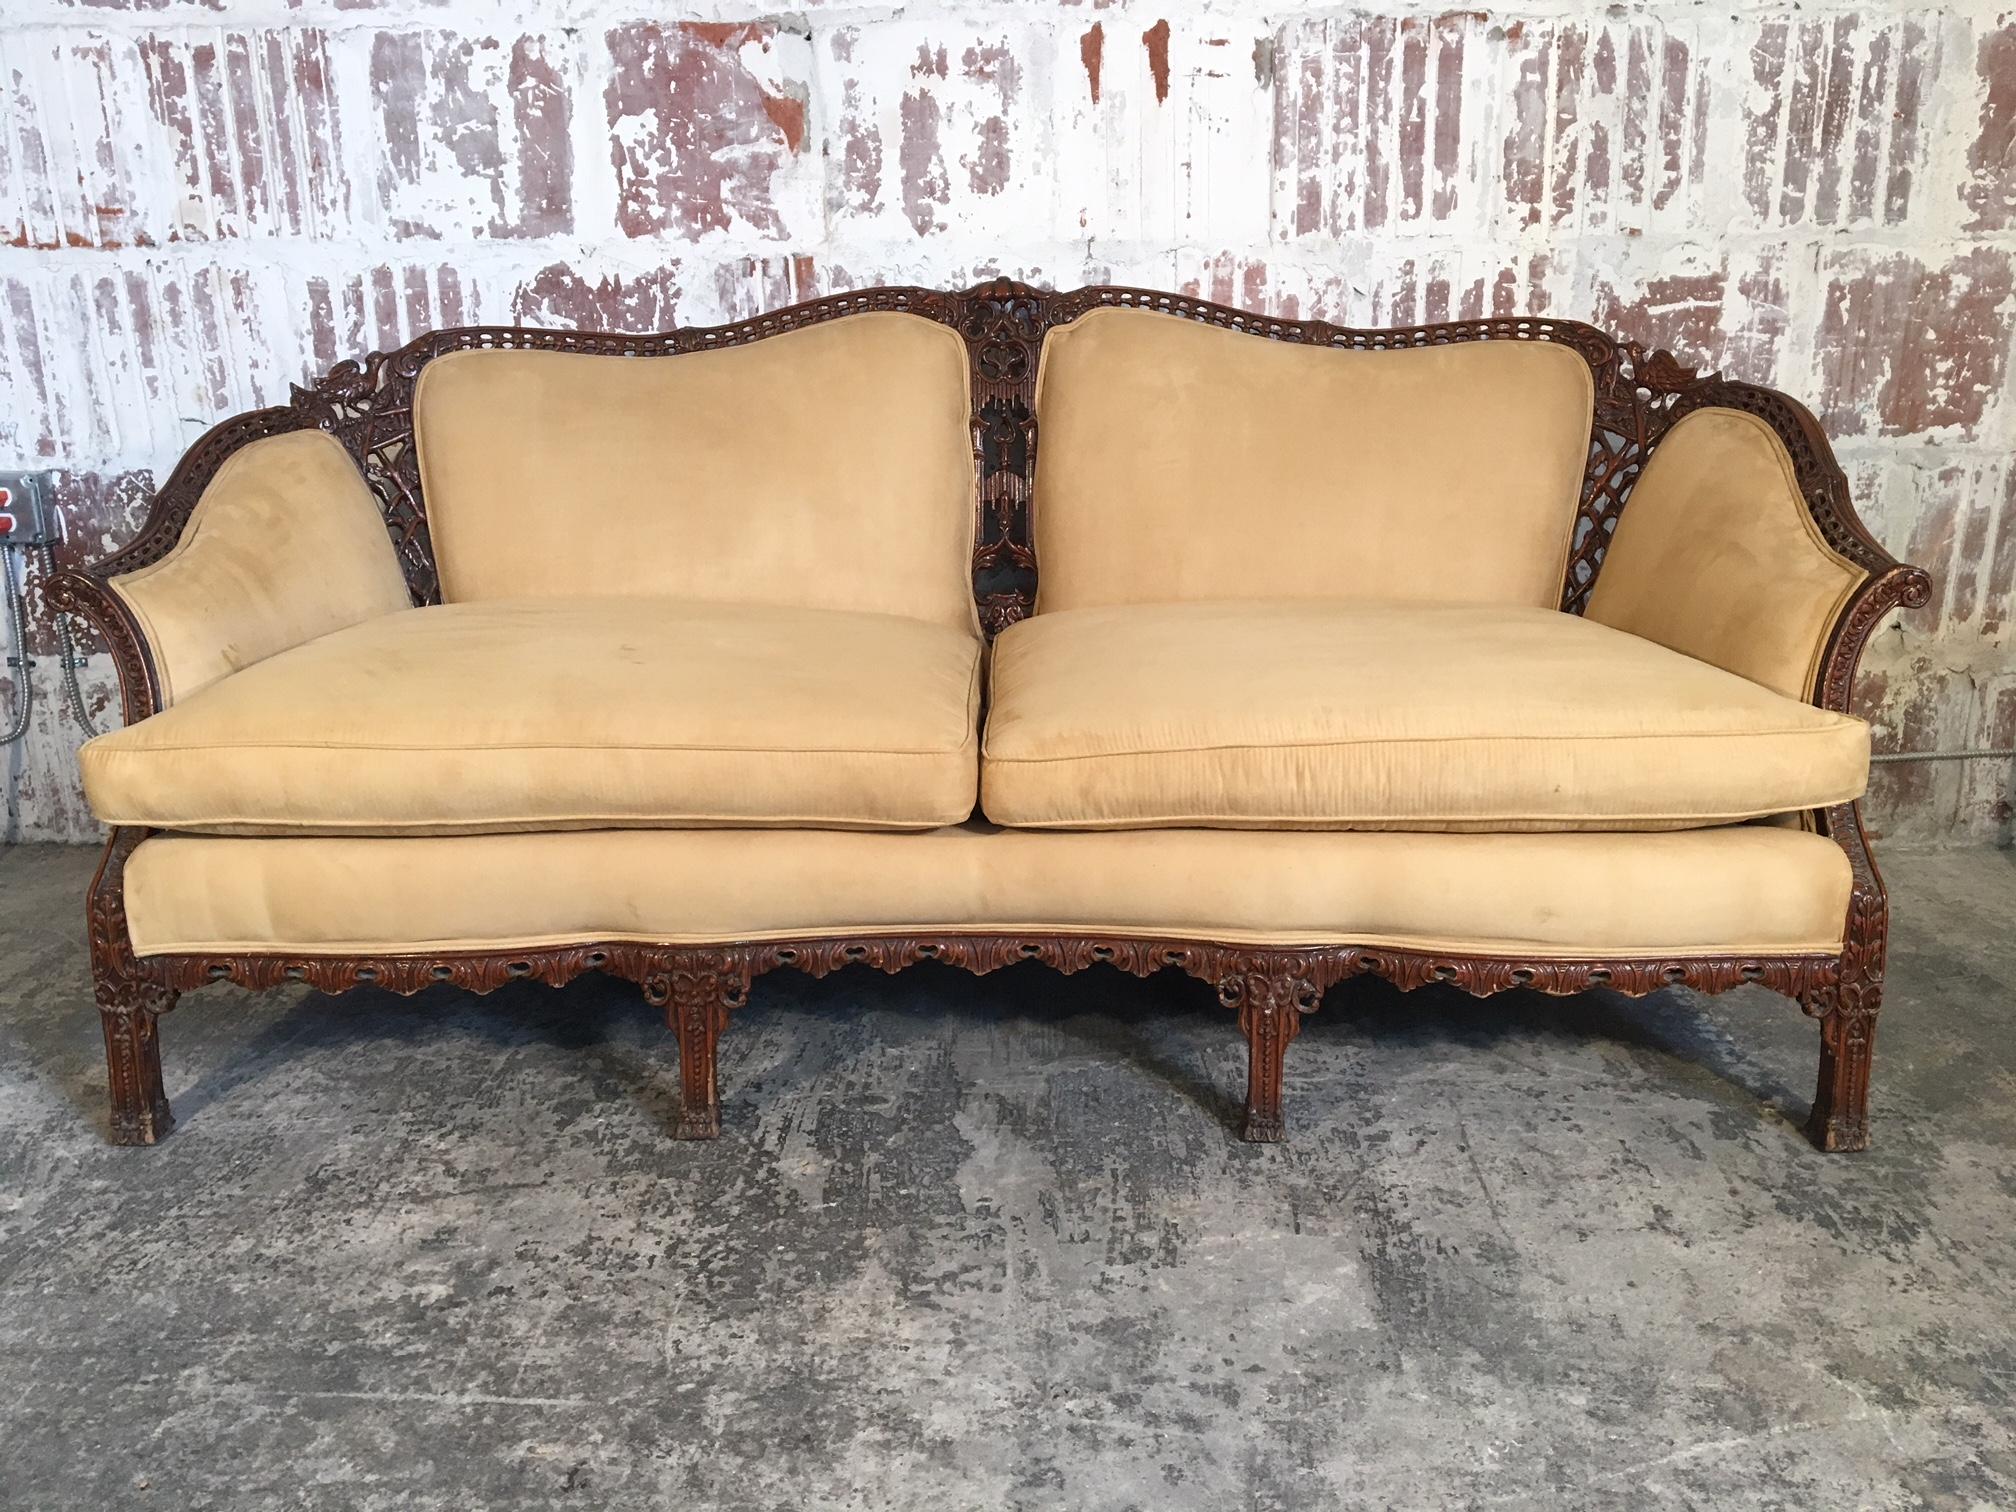 Hand carved sofa in Chinese chinoiserie style features intricate carvings and solid tan upholstery. Upholstered in a microfiber fabric. Good vintage condition with only minor signs of age appropriate wear. Professional reupholstery available.